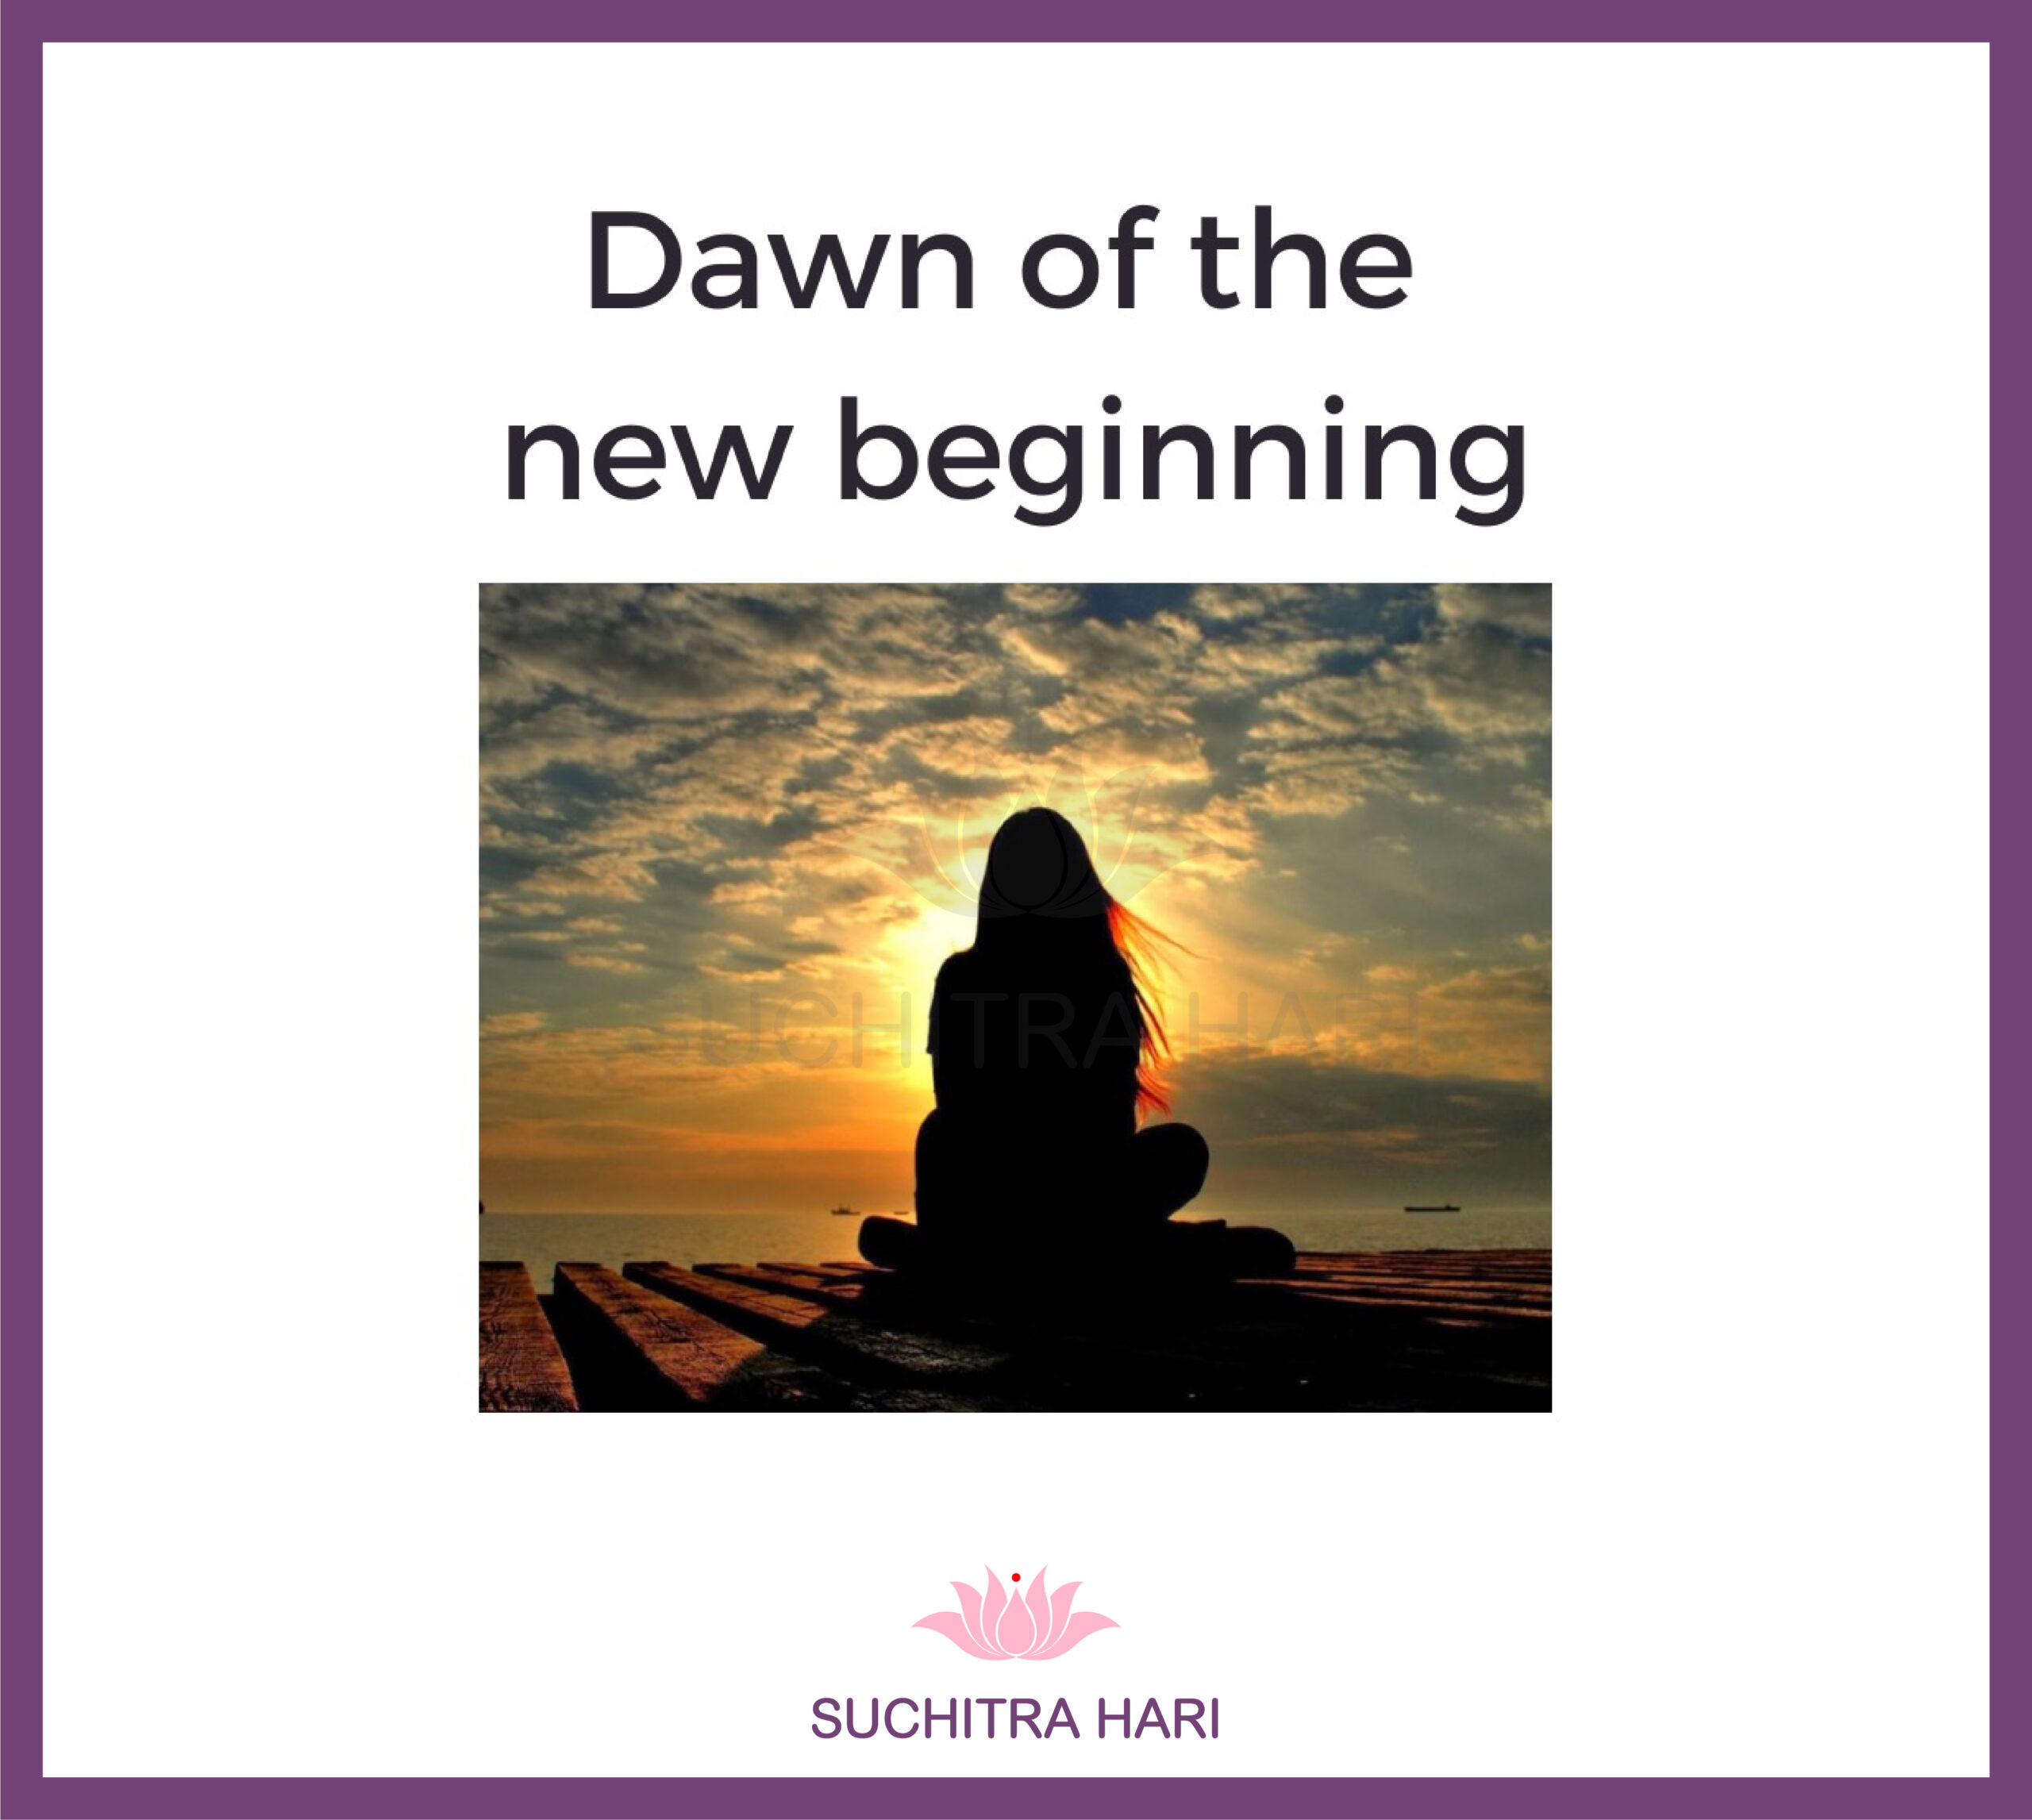 Dawn of the new beginning